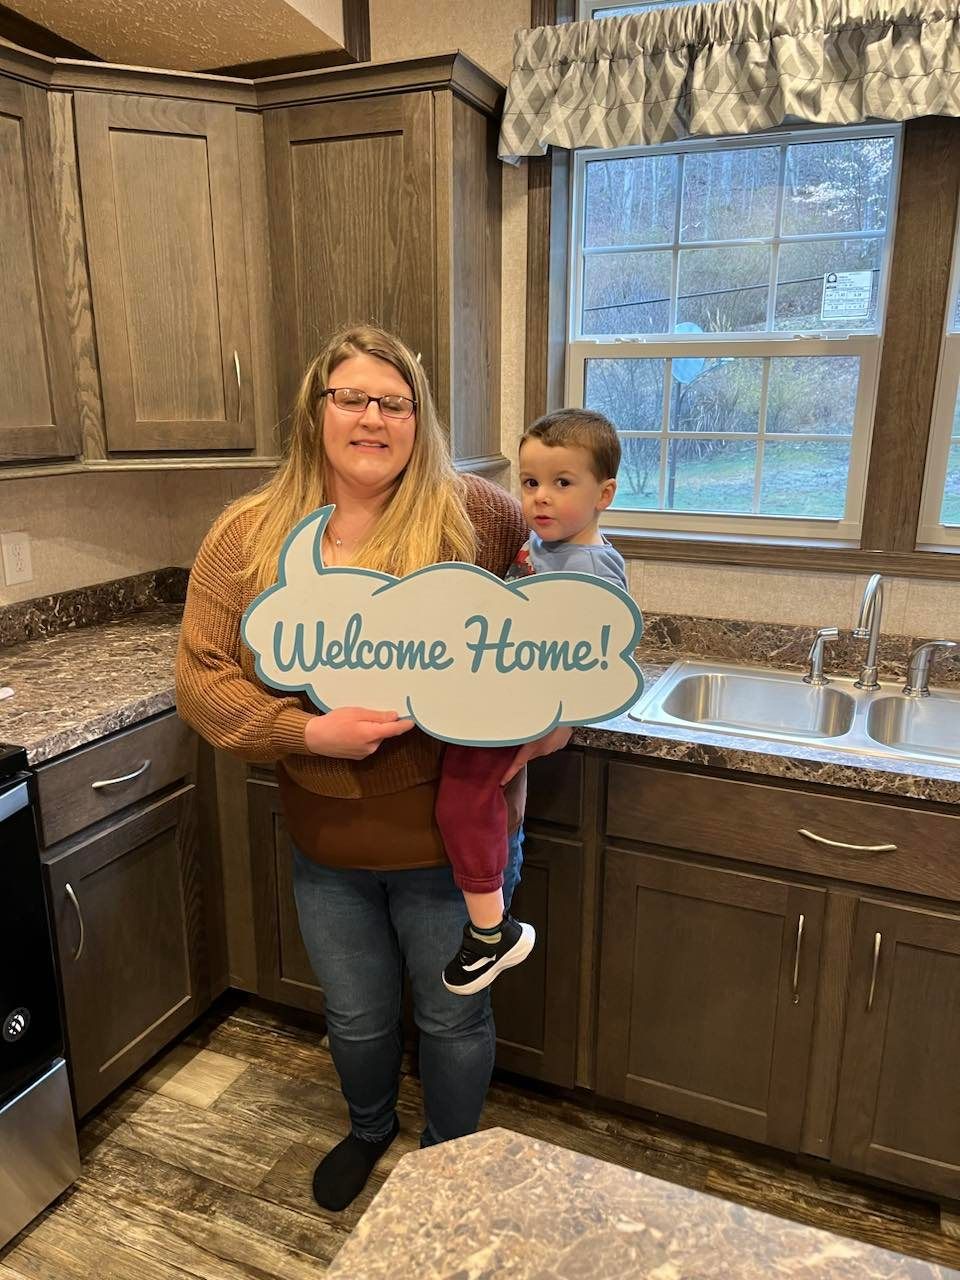 Melissa S. welcome home image